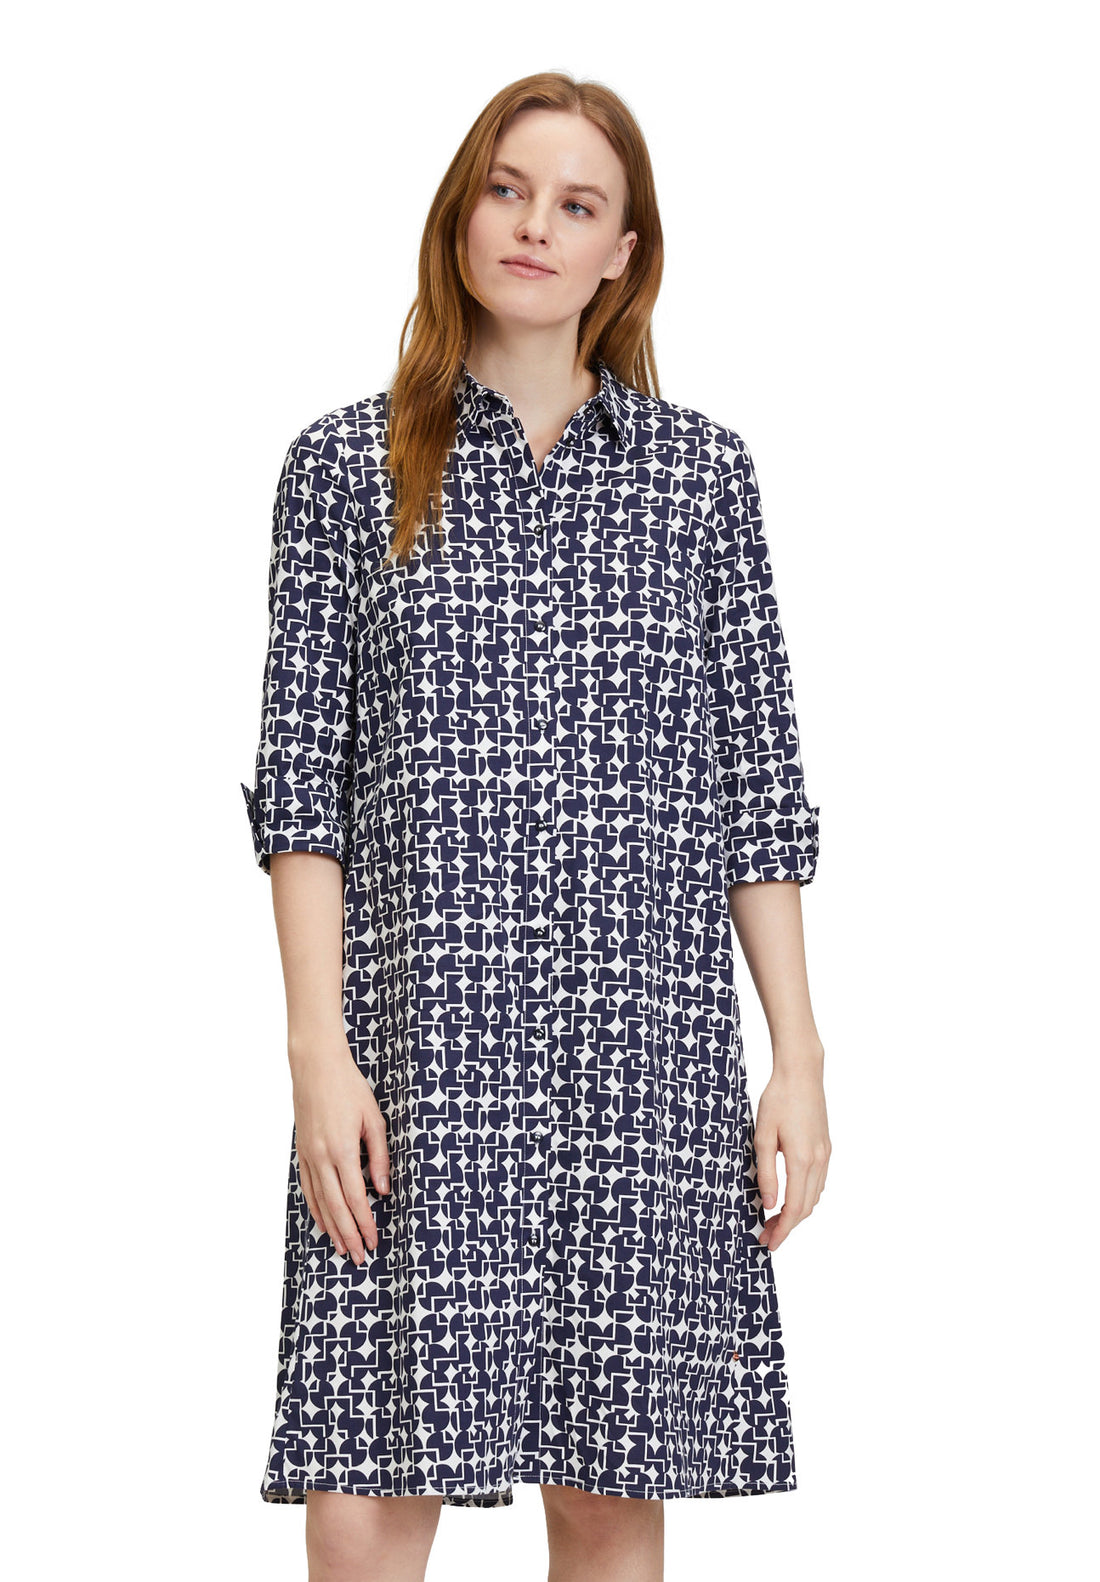 Shirt Dress With All Over Print_6574 4175_1882_03